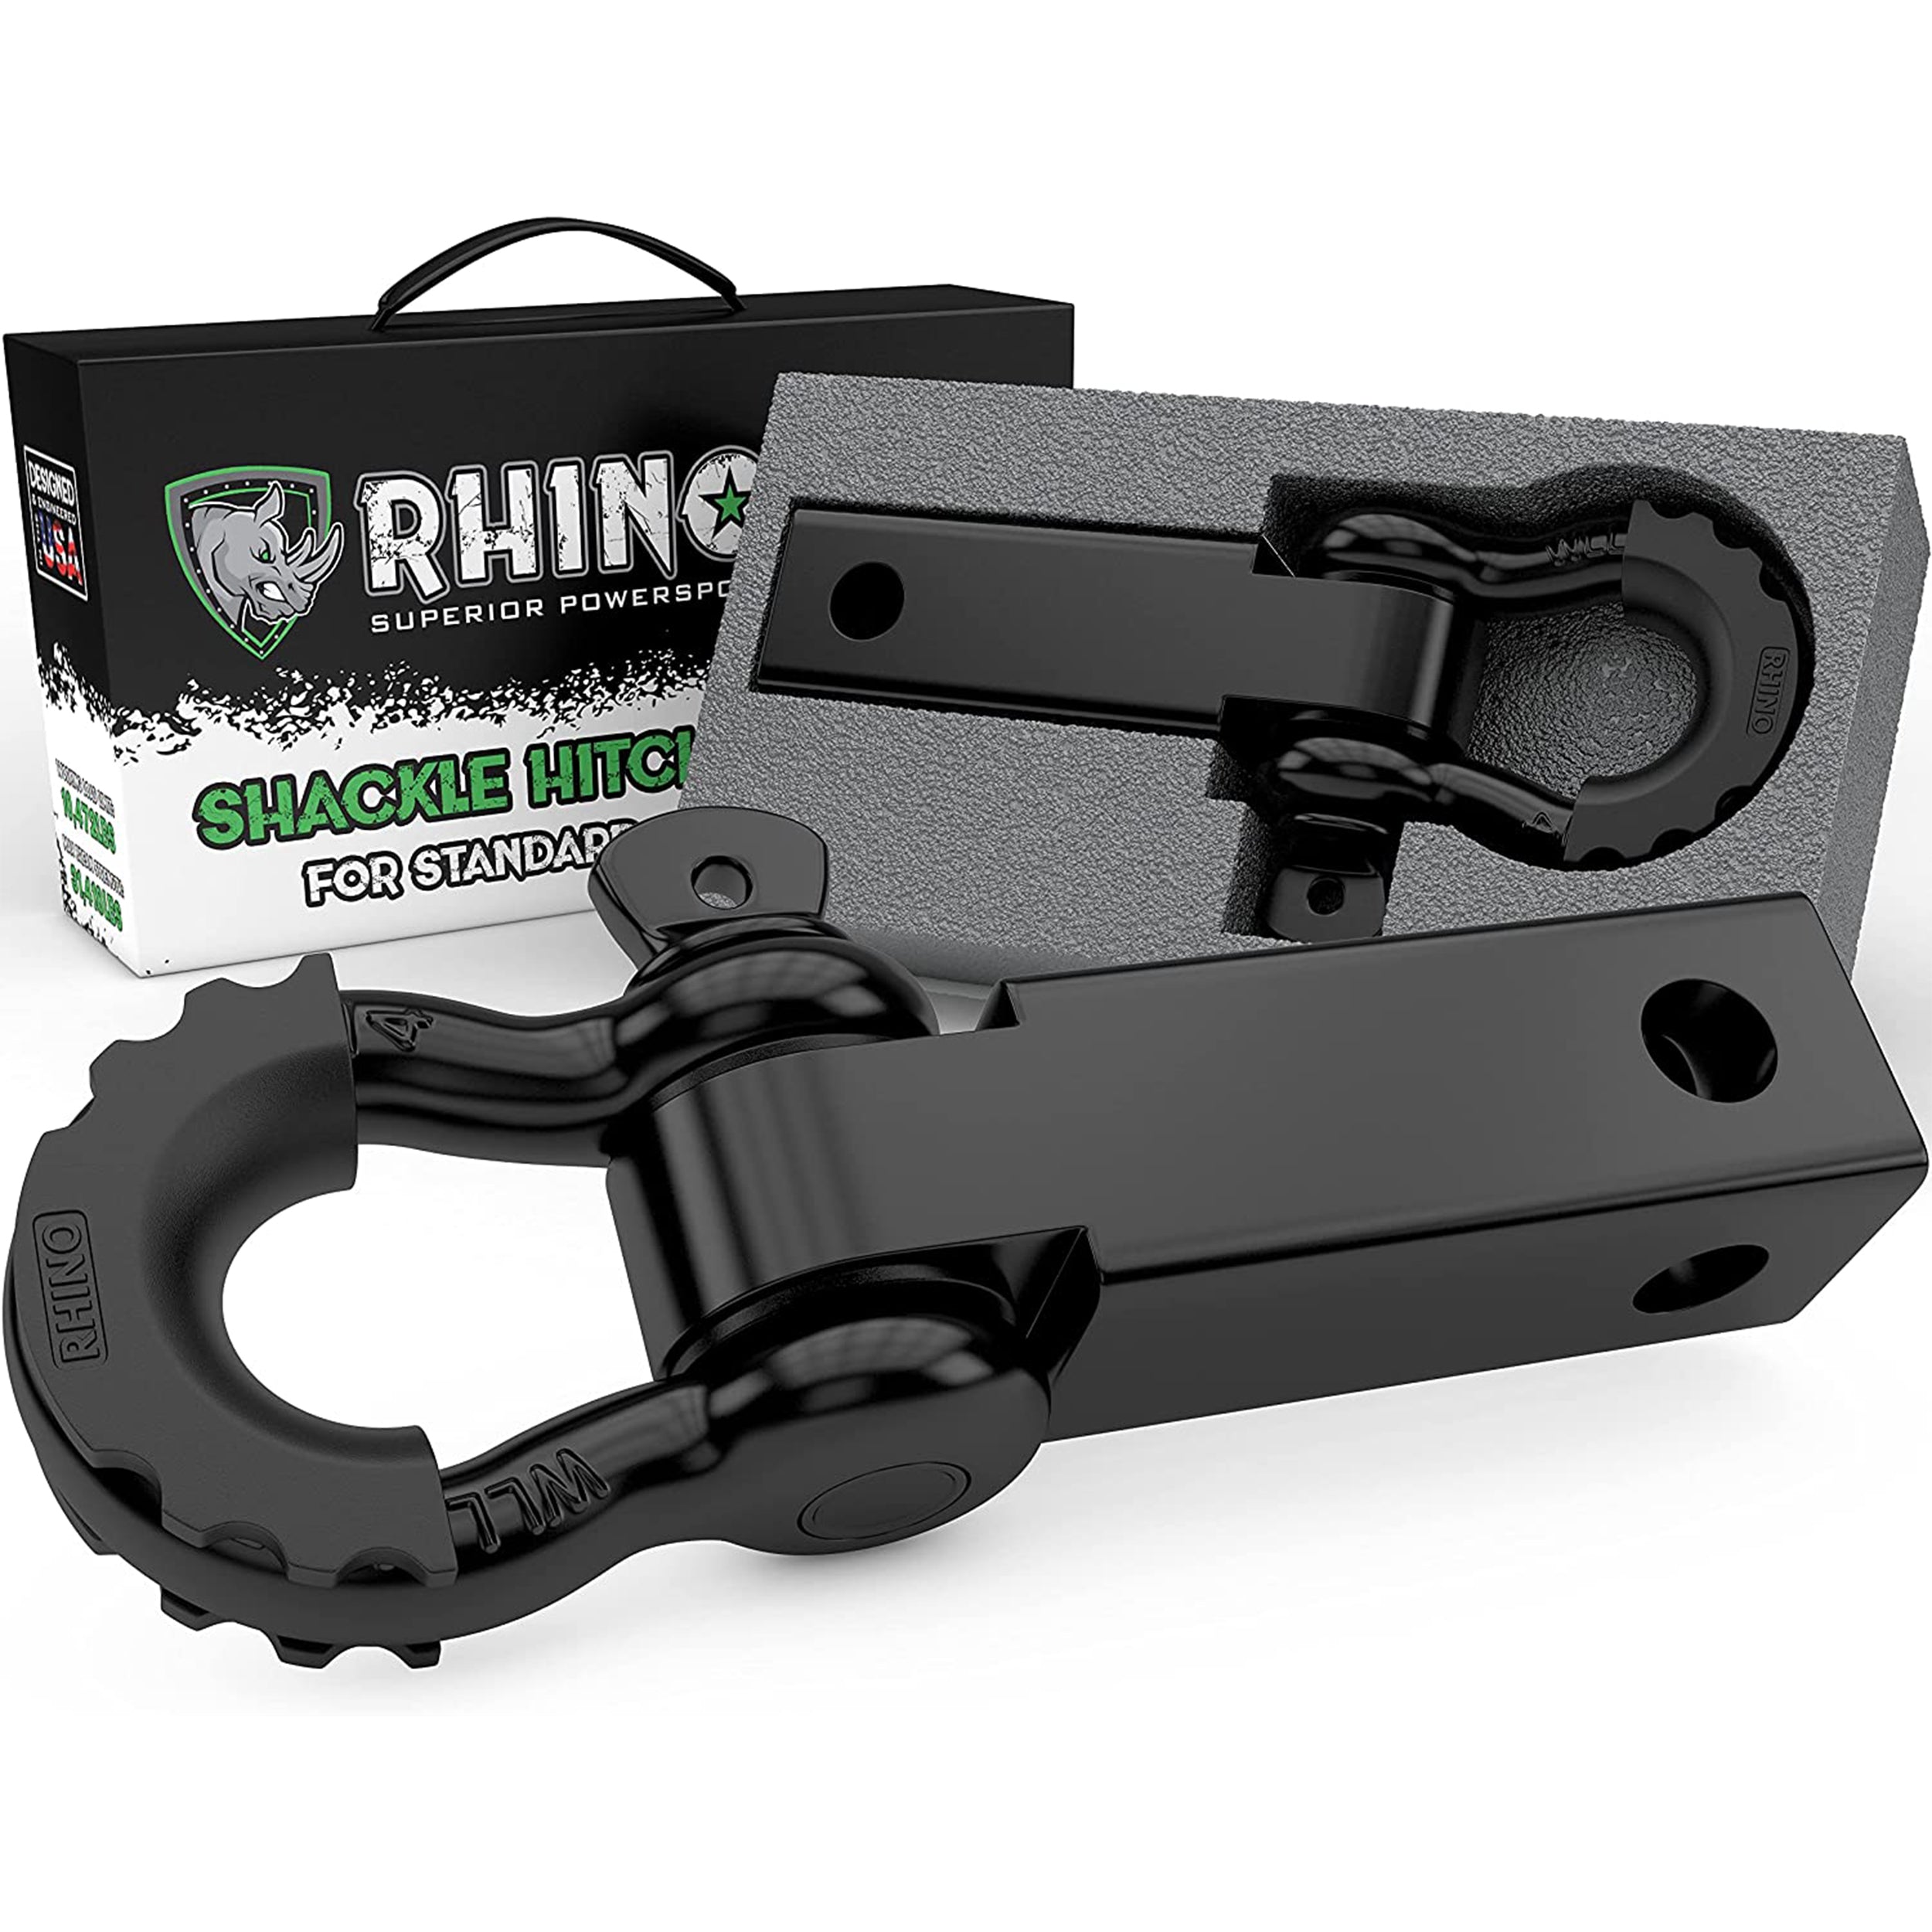 Best Shackle Hitch Receiver (2 Recovery Hitch) - Rhino USA